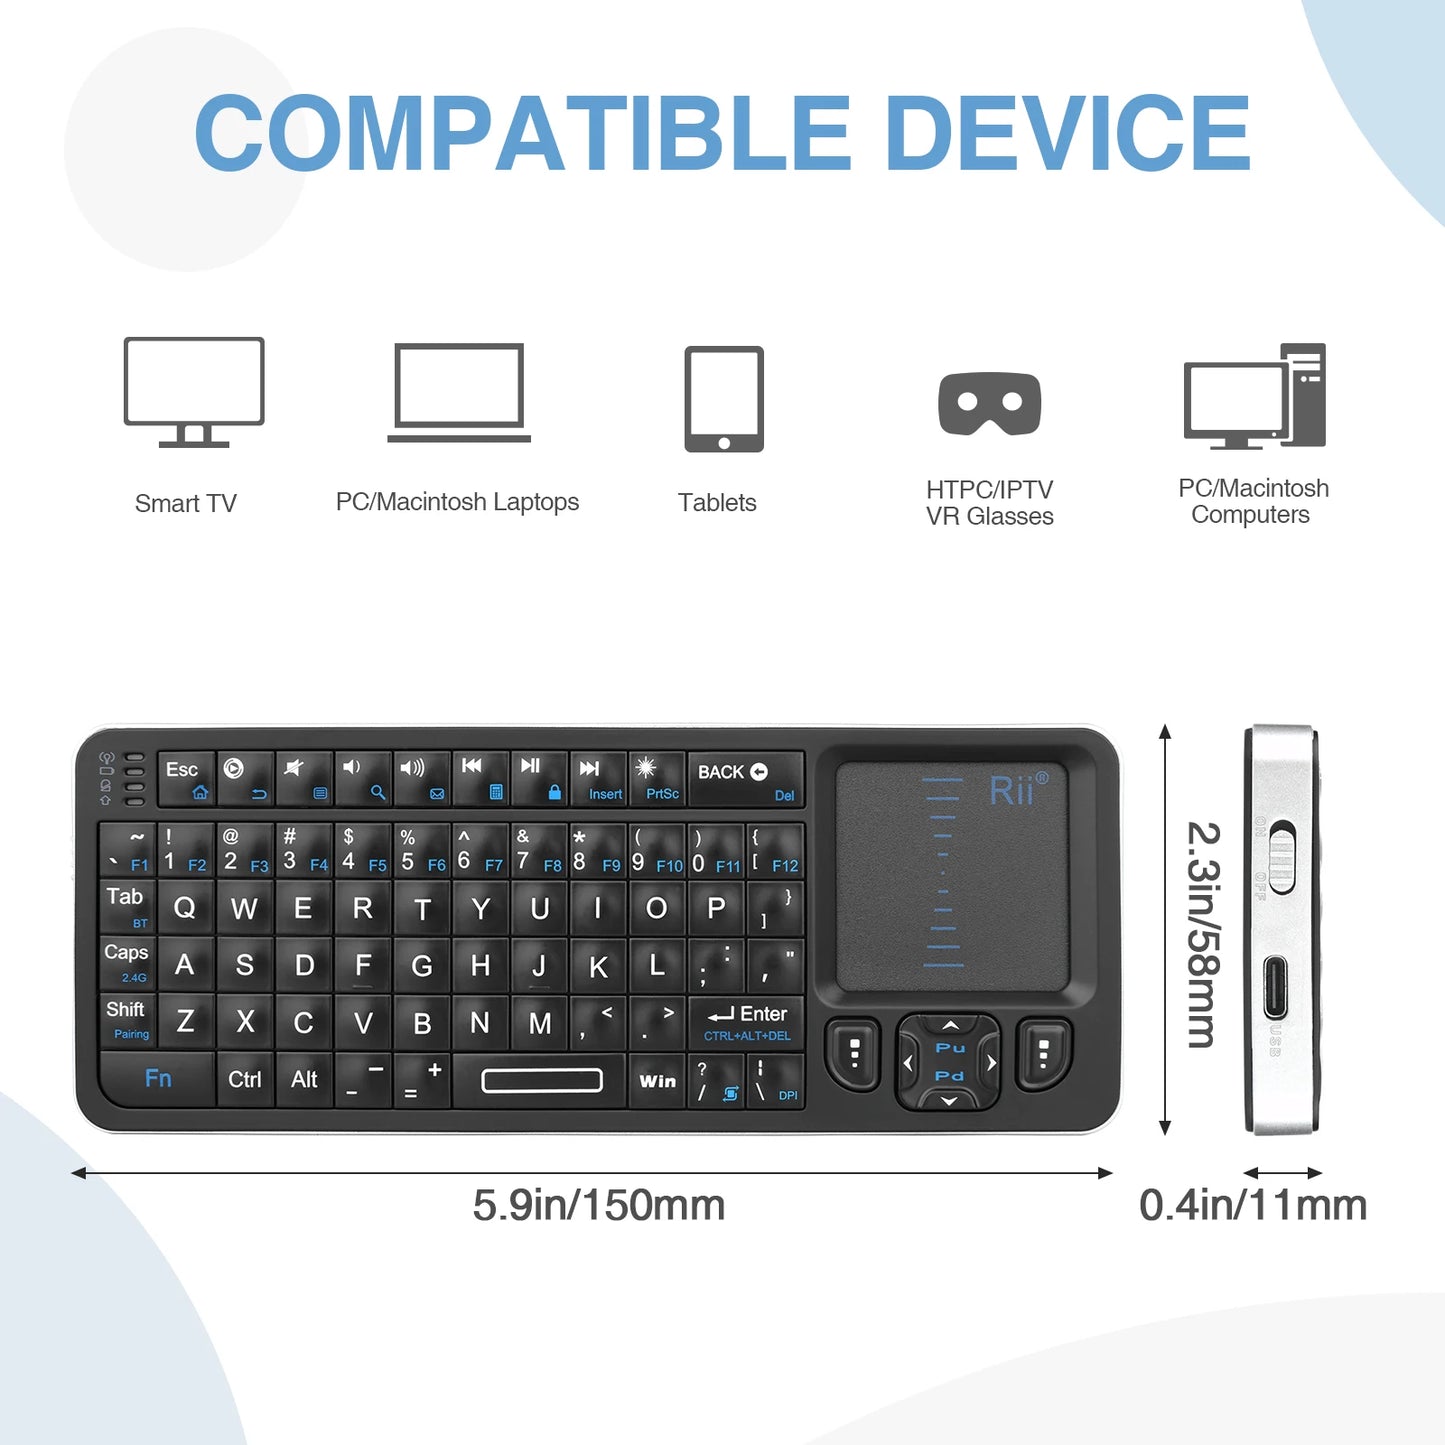 2.4G Mini Wireless Keyboard with Touchpad Mouse Combo,Rii K06 Keyboard Controller, Compatible with Android TV Box/PC/Tablets/PS4